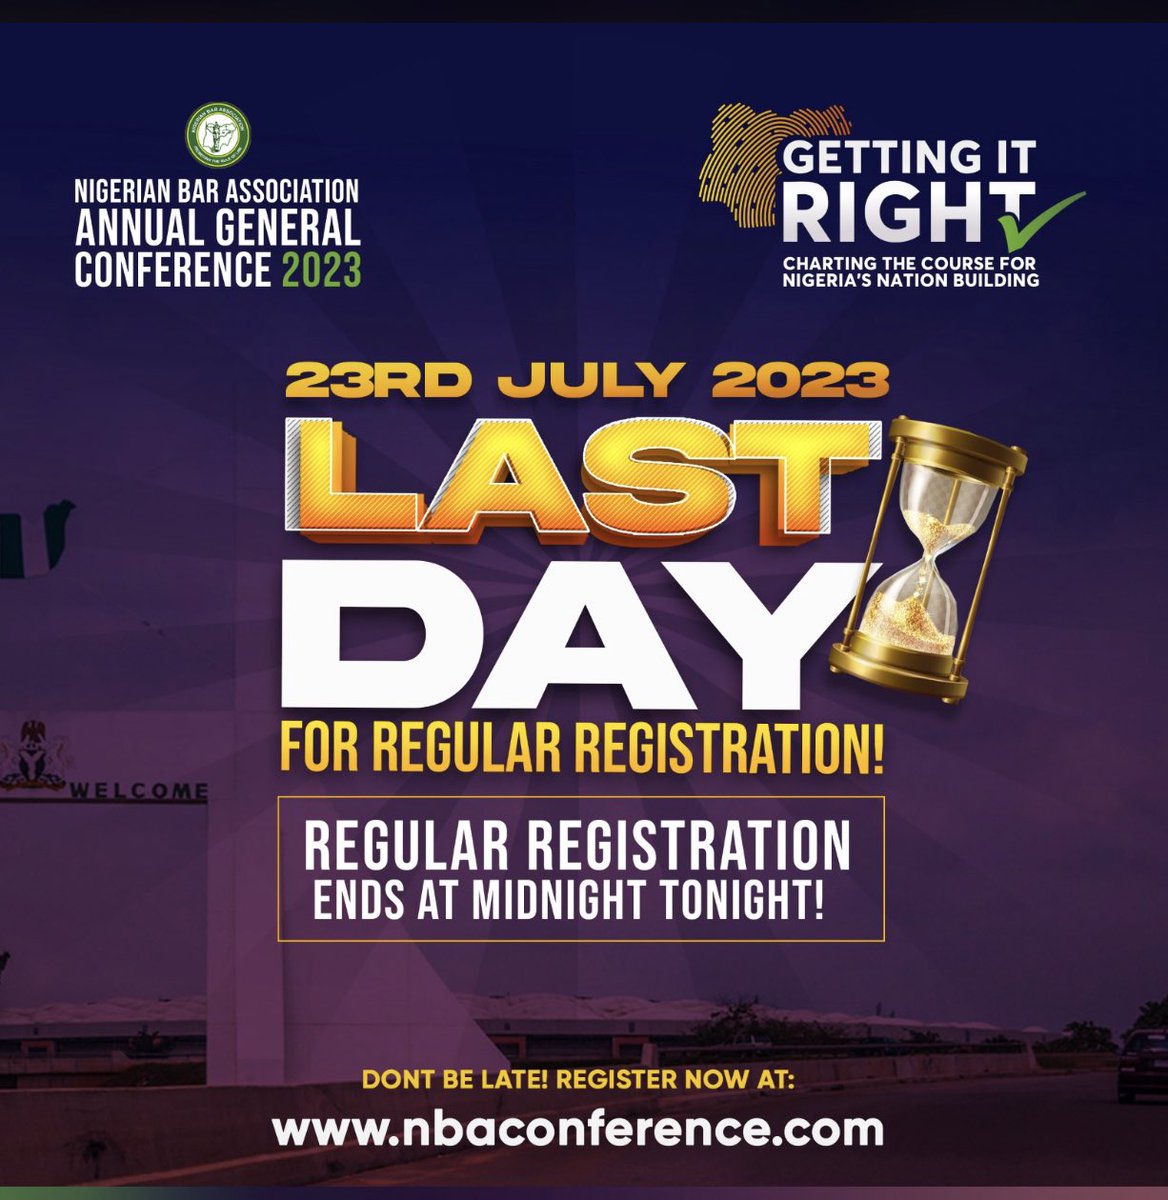 Have you heard that the regular registration for the NBA 2023 Annual General Conference closes today at midnight?

If not yet registered, hurry up to do so now!
Don’t miss out on this, it promises to be great!🔥🔥🔥#NBAAGC2023
#NigerianBarAssociation